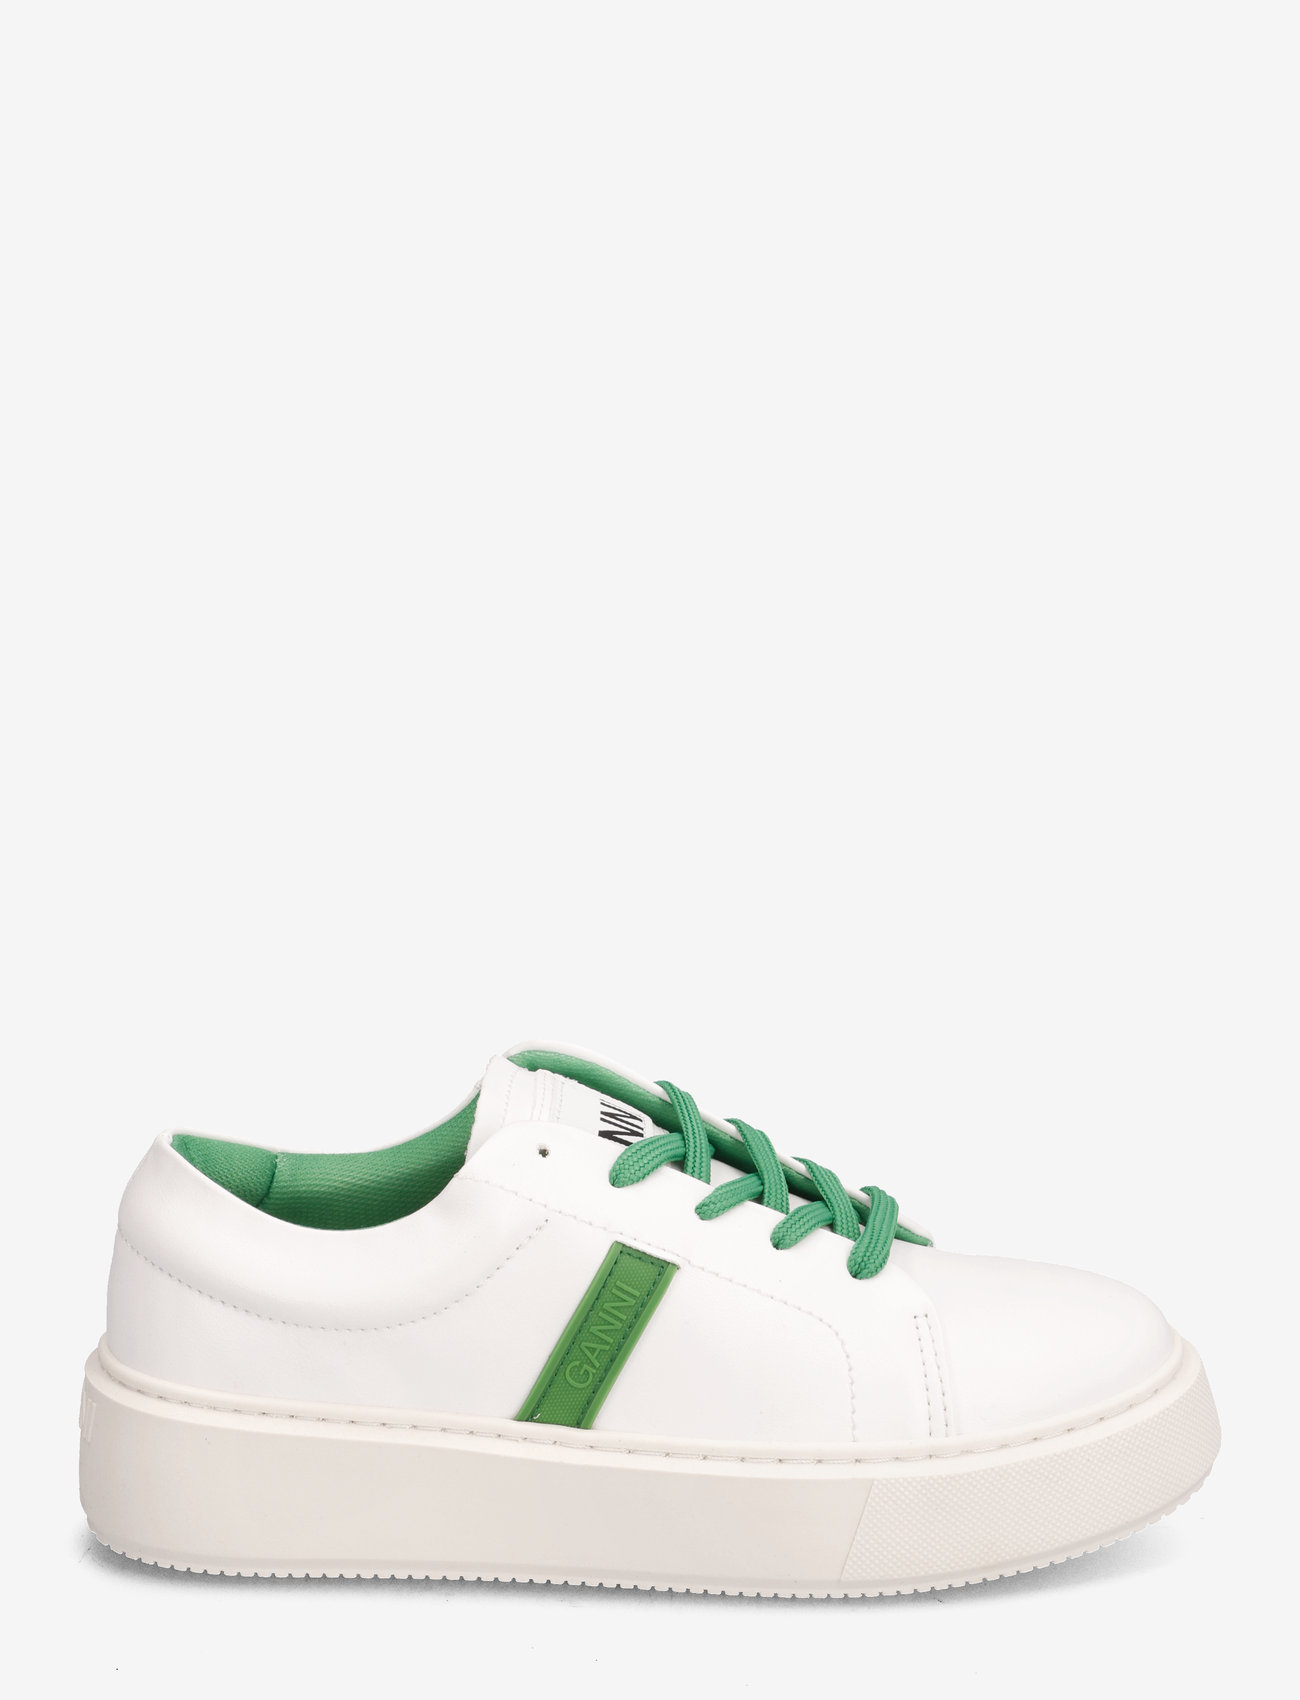 Ganni - Sporty Mix - low top sneakers - kelly green - 1